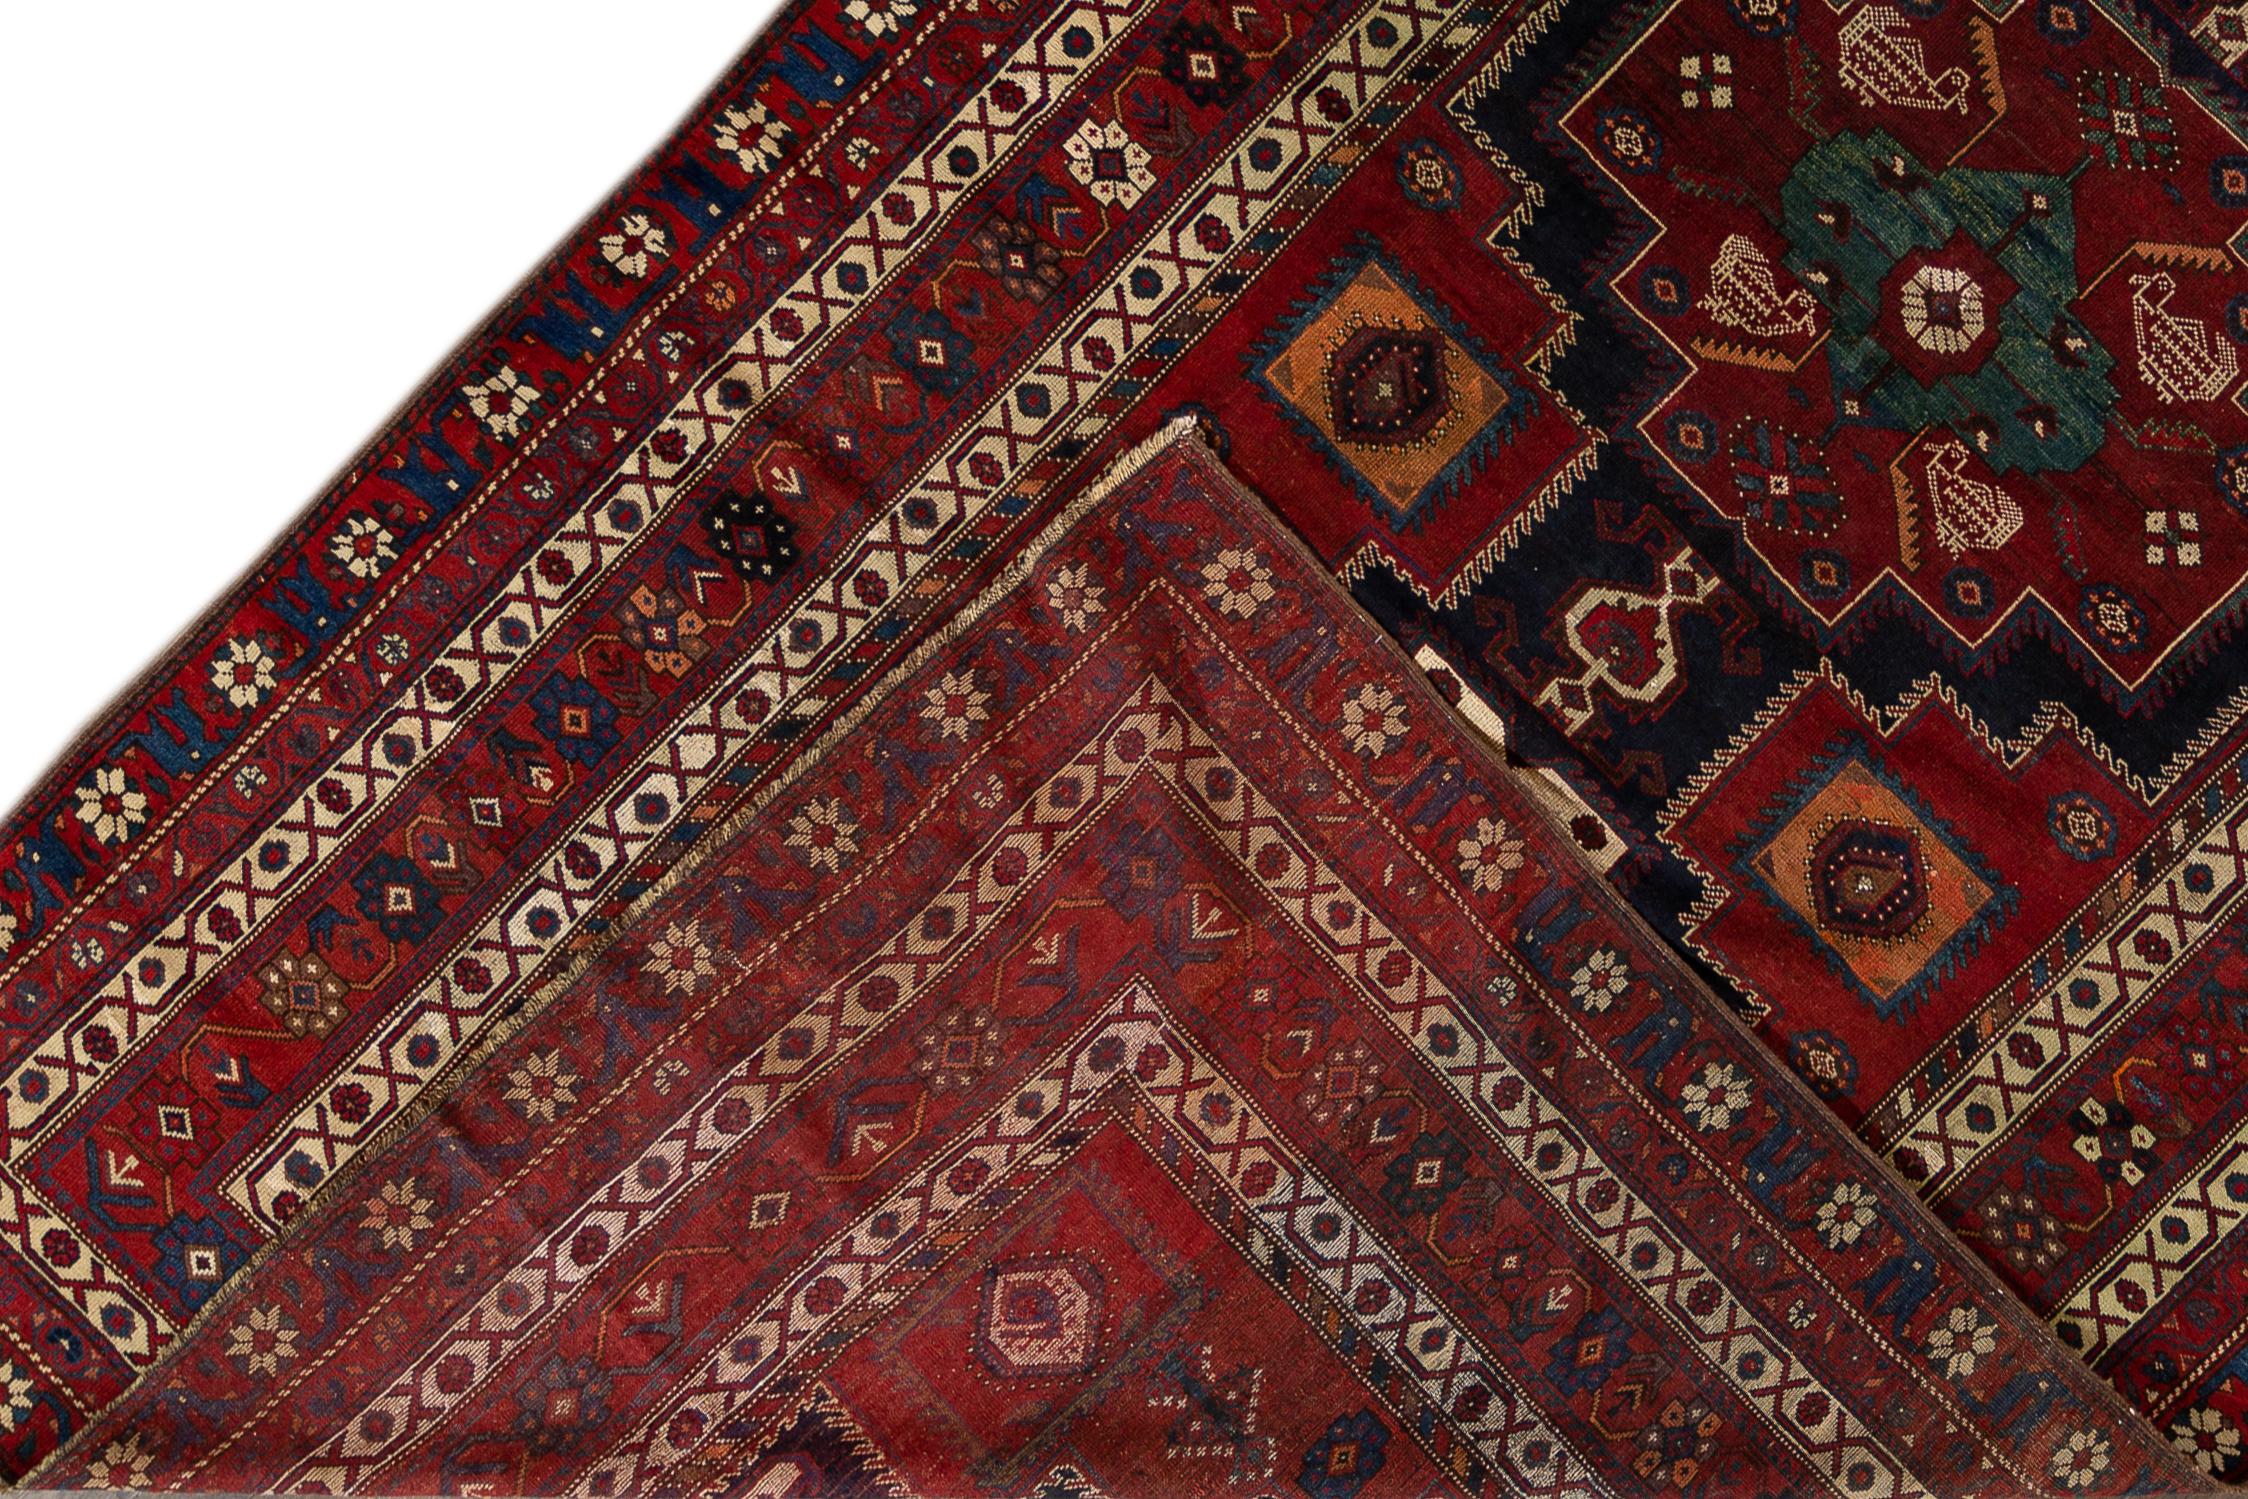 Early 20th century Caucasian blue rug. Measures: 6'9